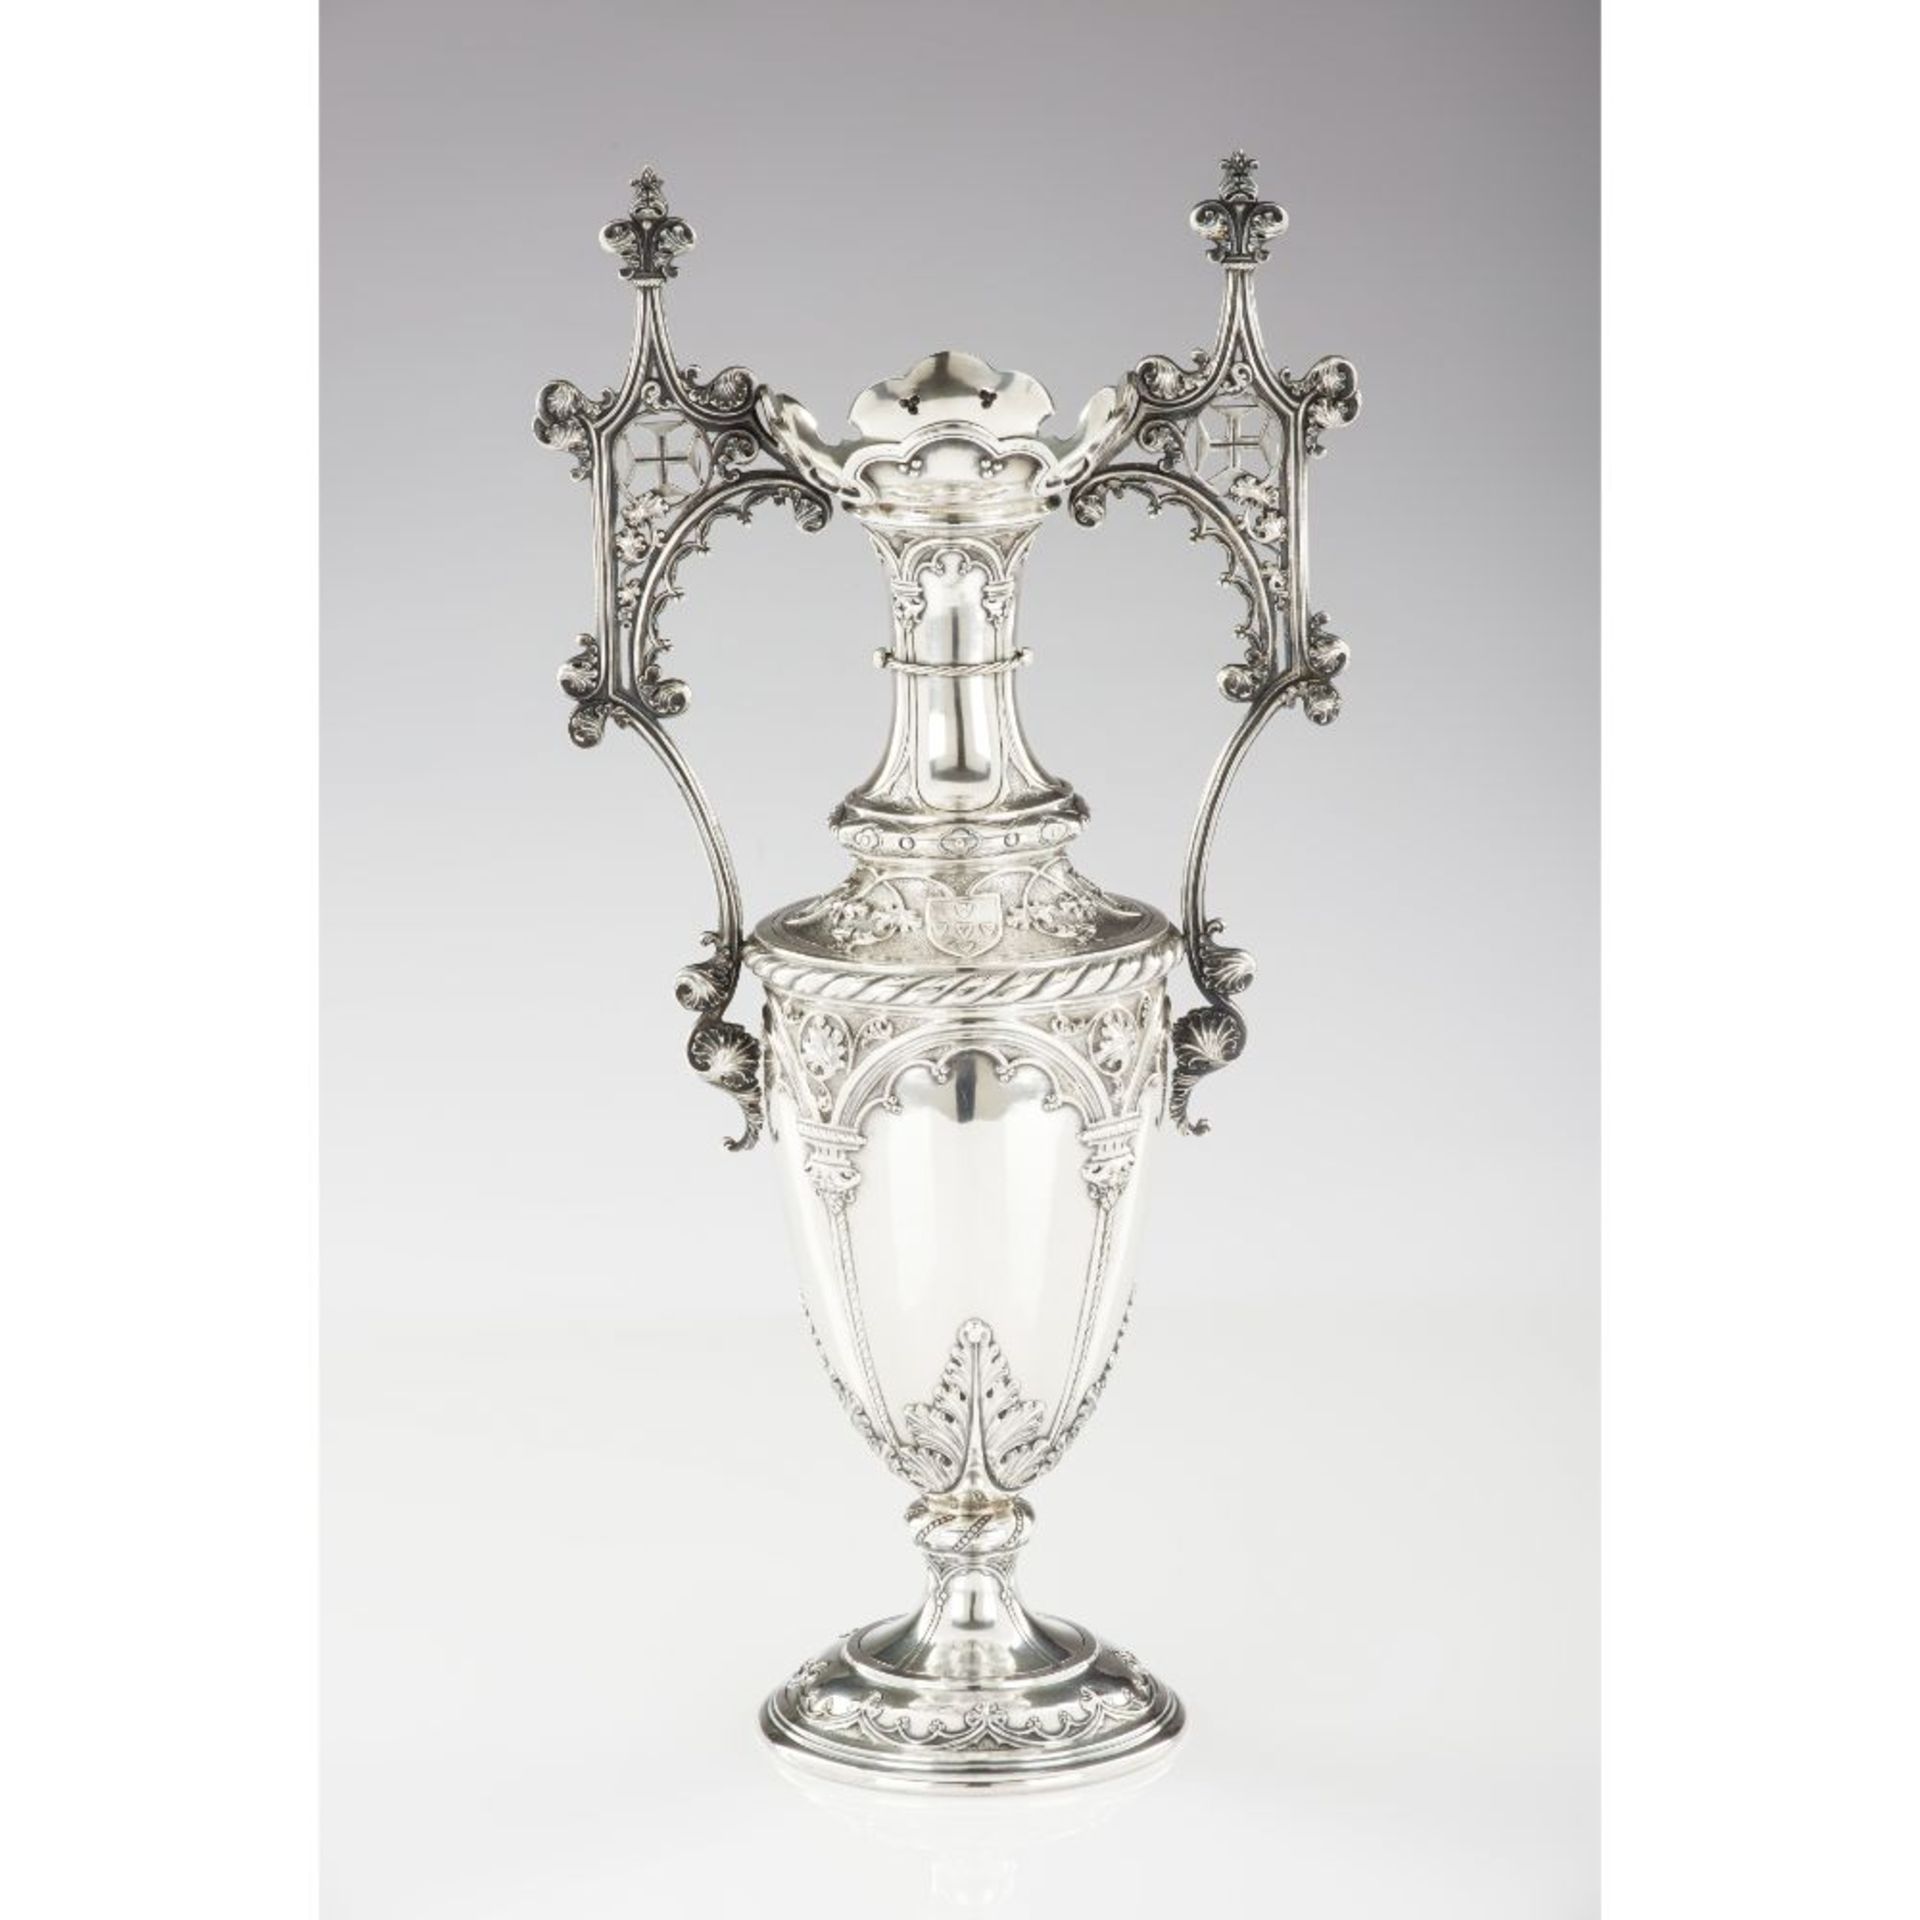 A neogothic style vase, Silver, Neogothic decoration with Cross of Christ, arches and armorial